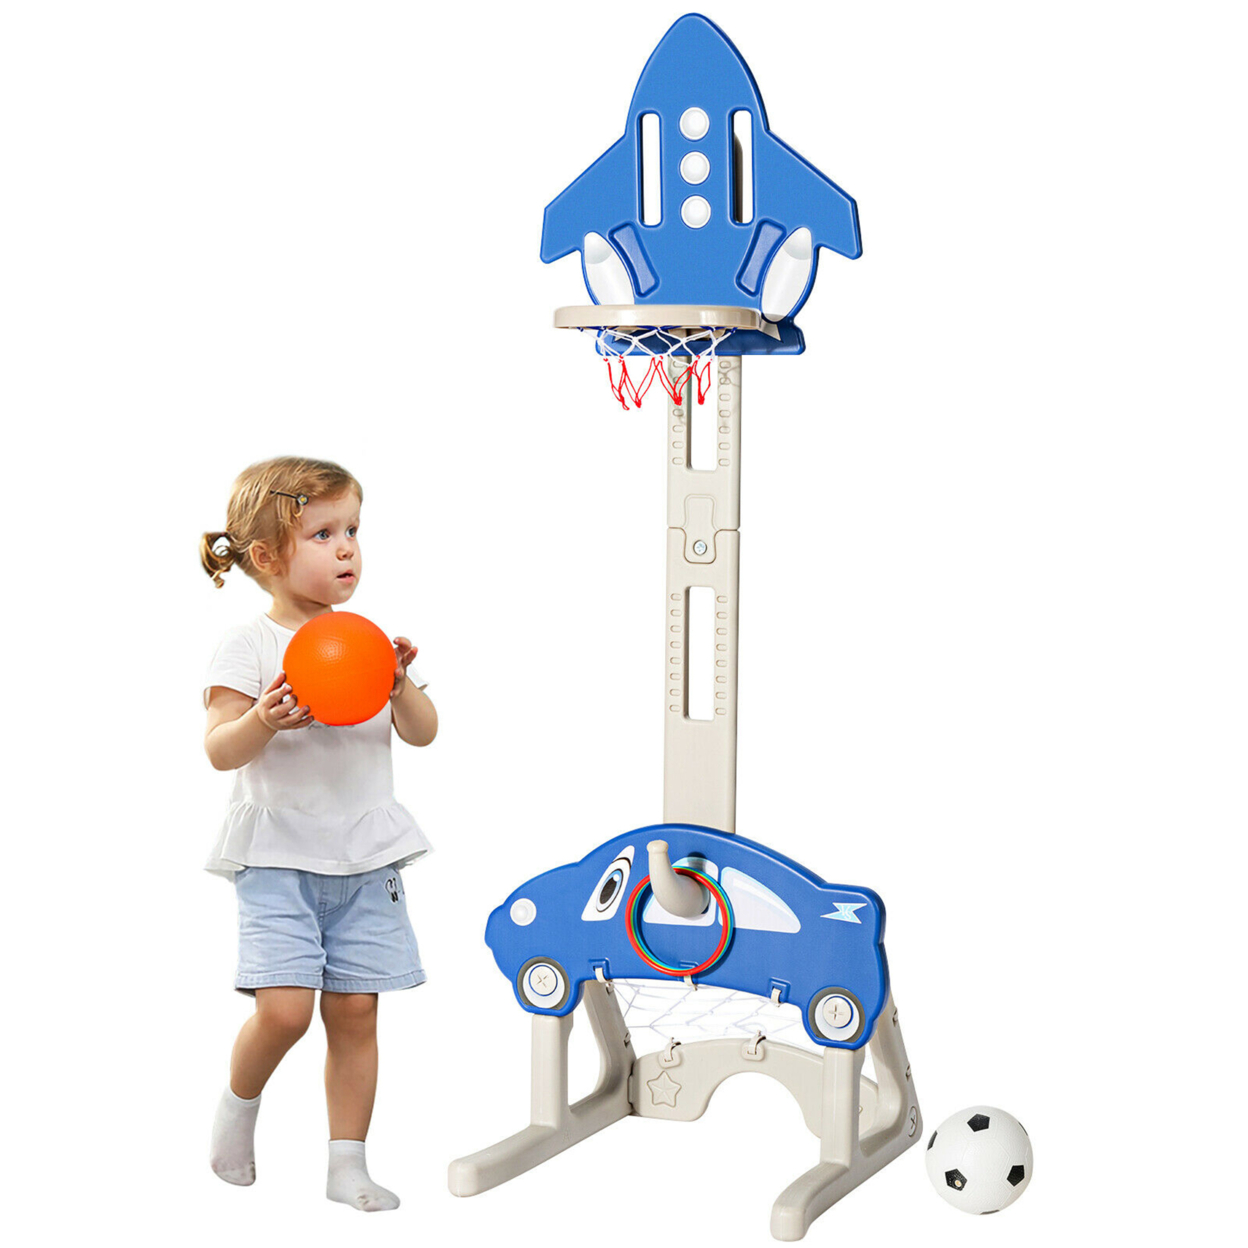 3-in-1 Basketball Hoop For Kids Adjustable Height Playset W/ Balls Blue